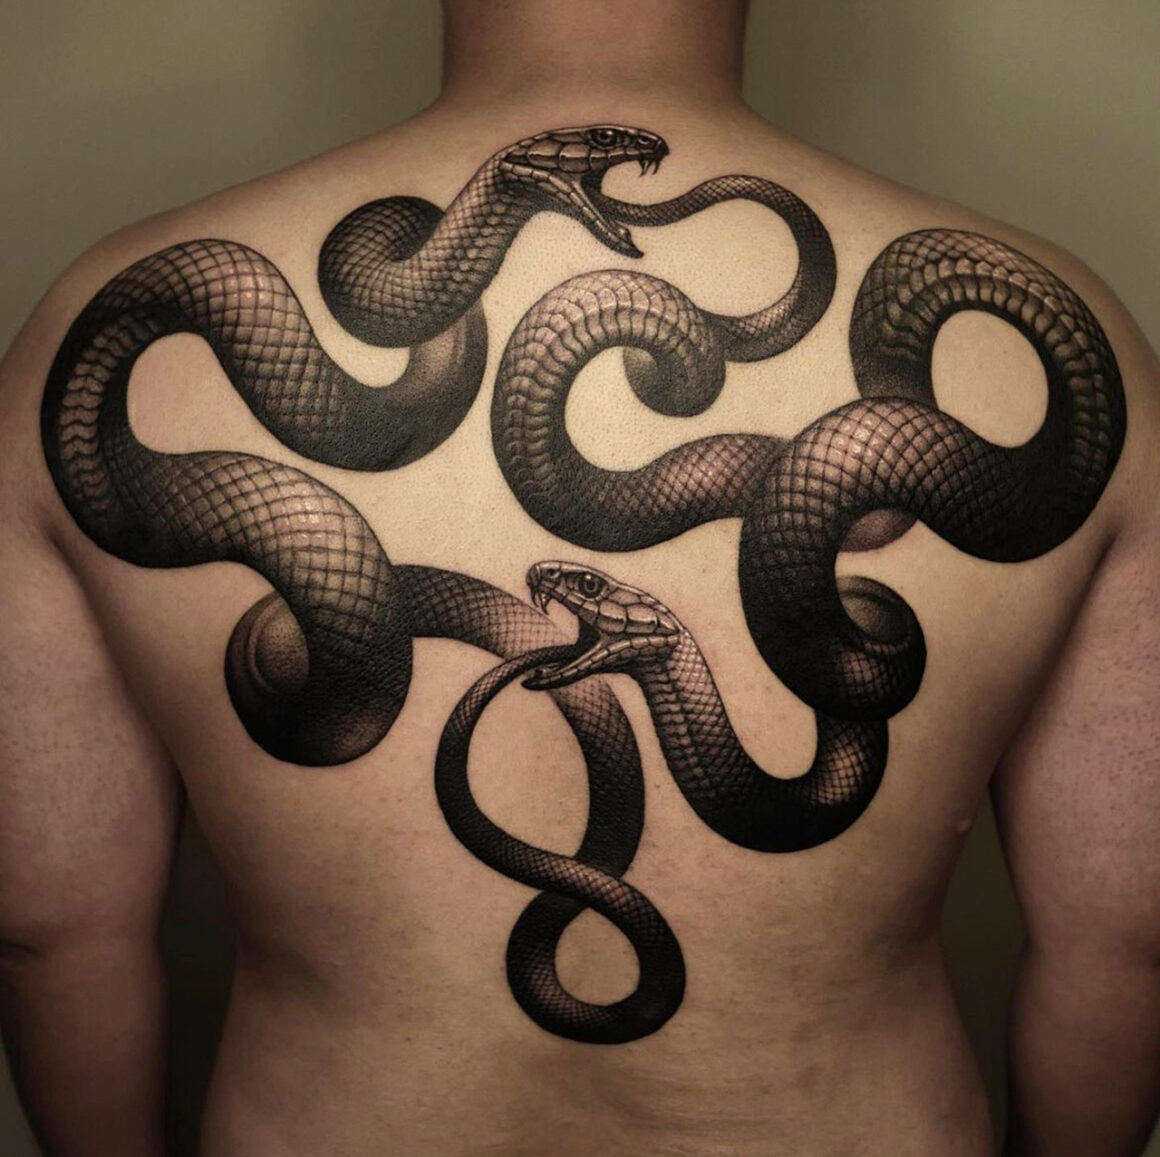 The changing skin of the snake - Tattoo Life